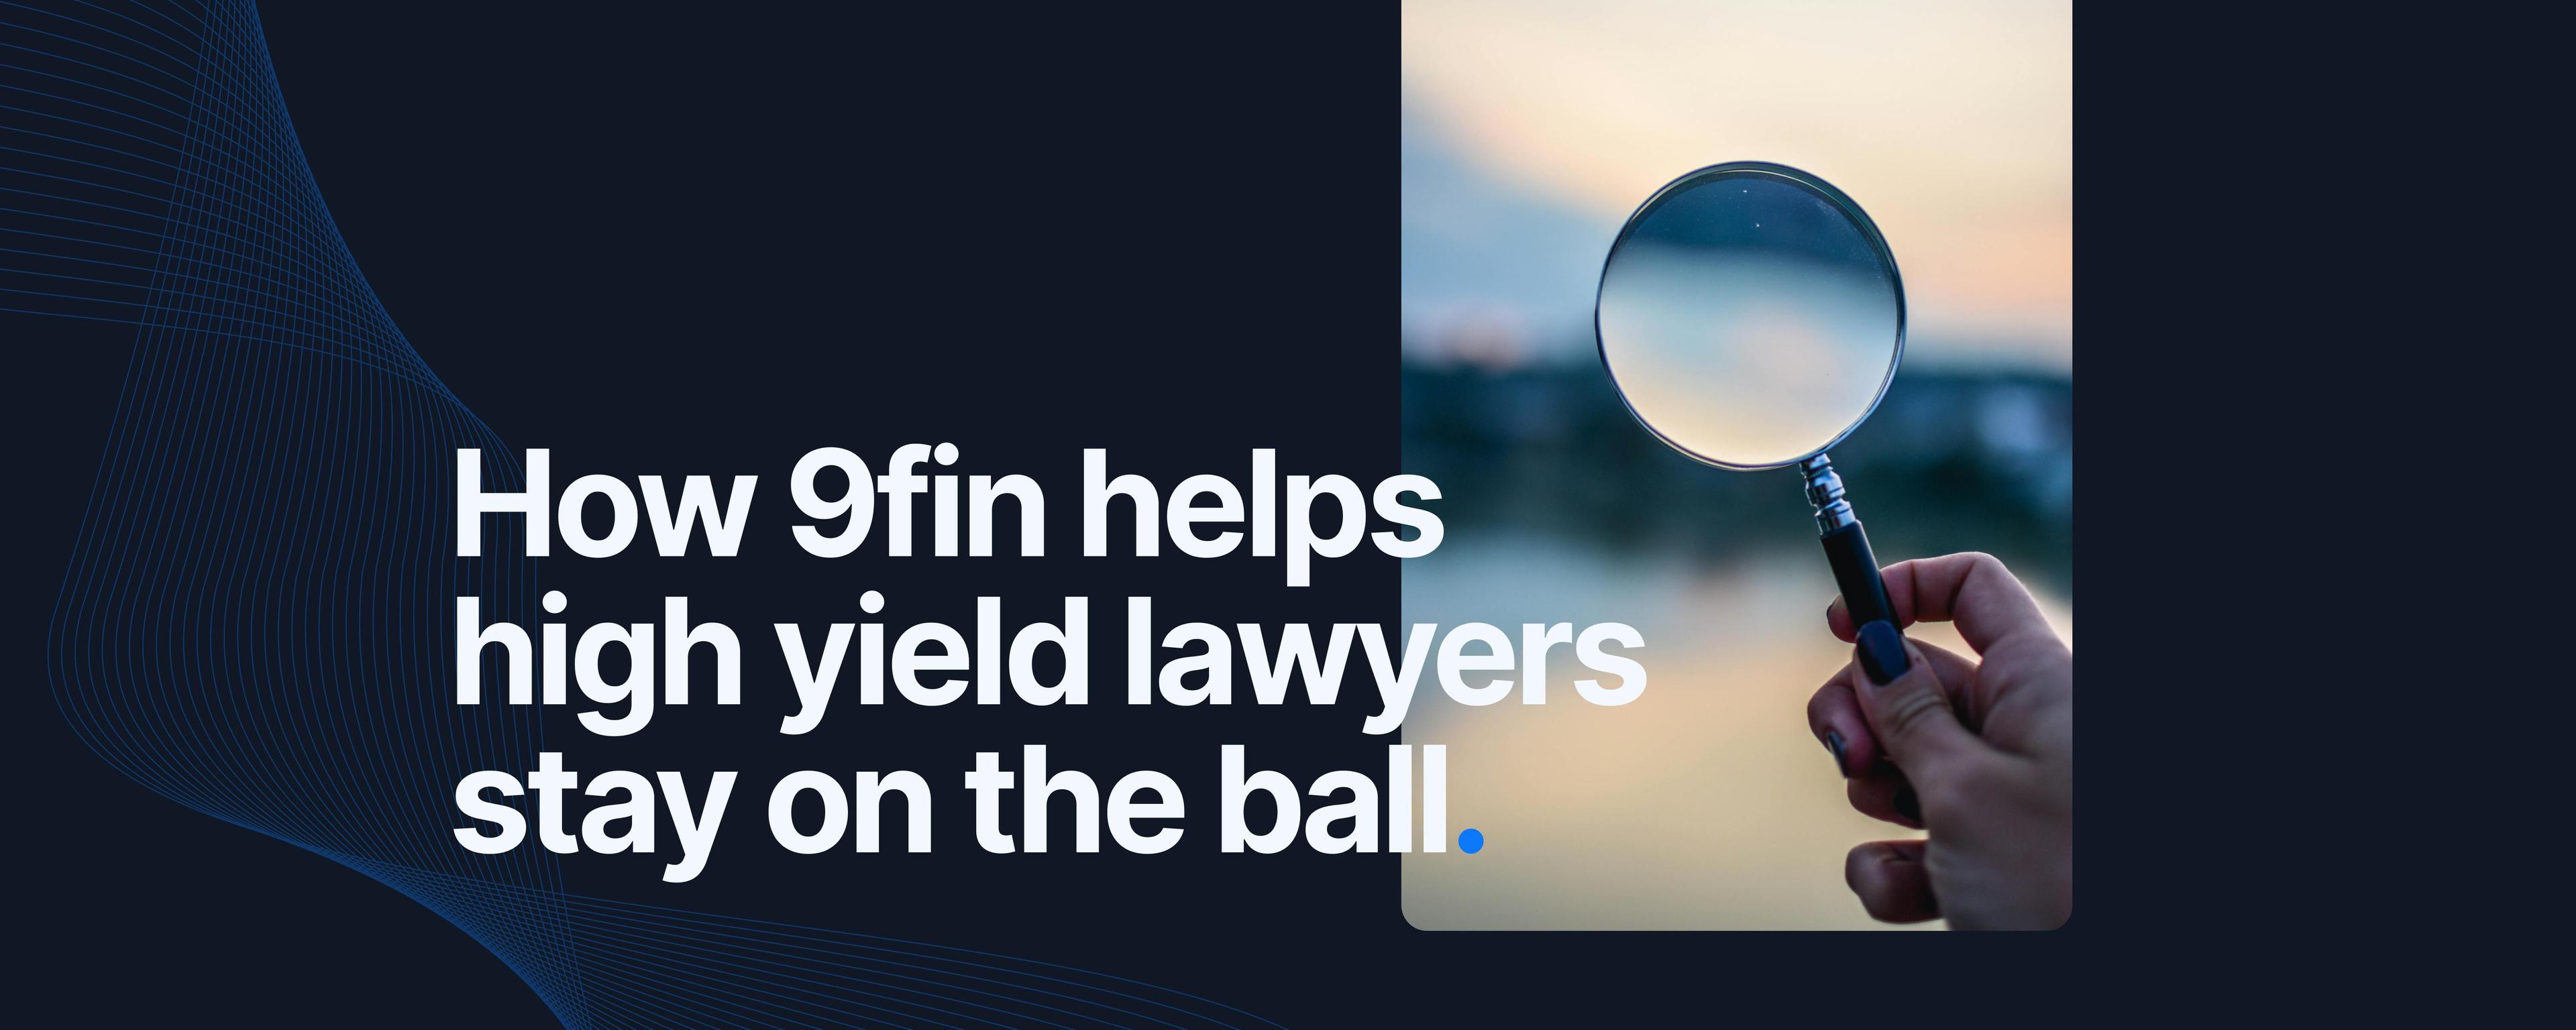 Customer story: how 9fin helps high yield lawyers stay on the ball